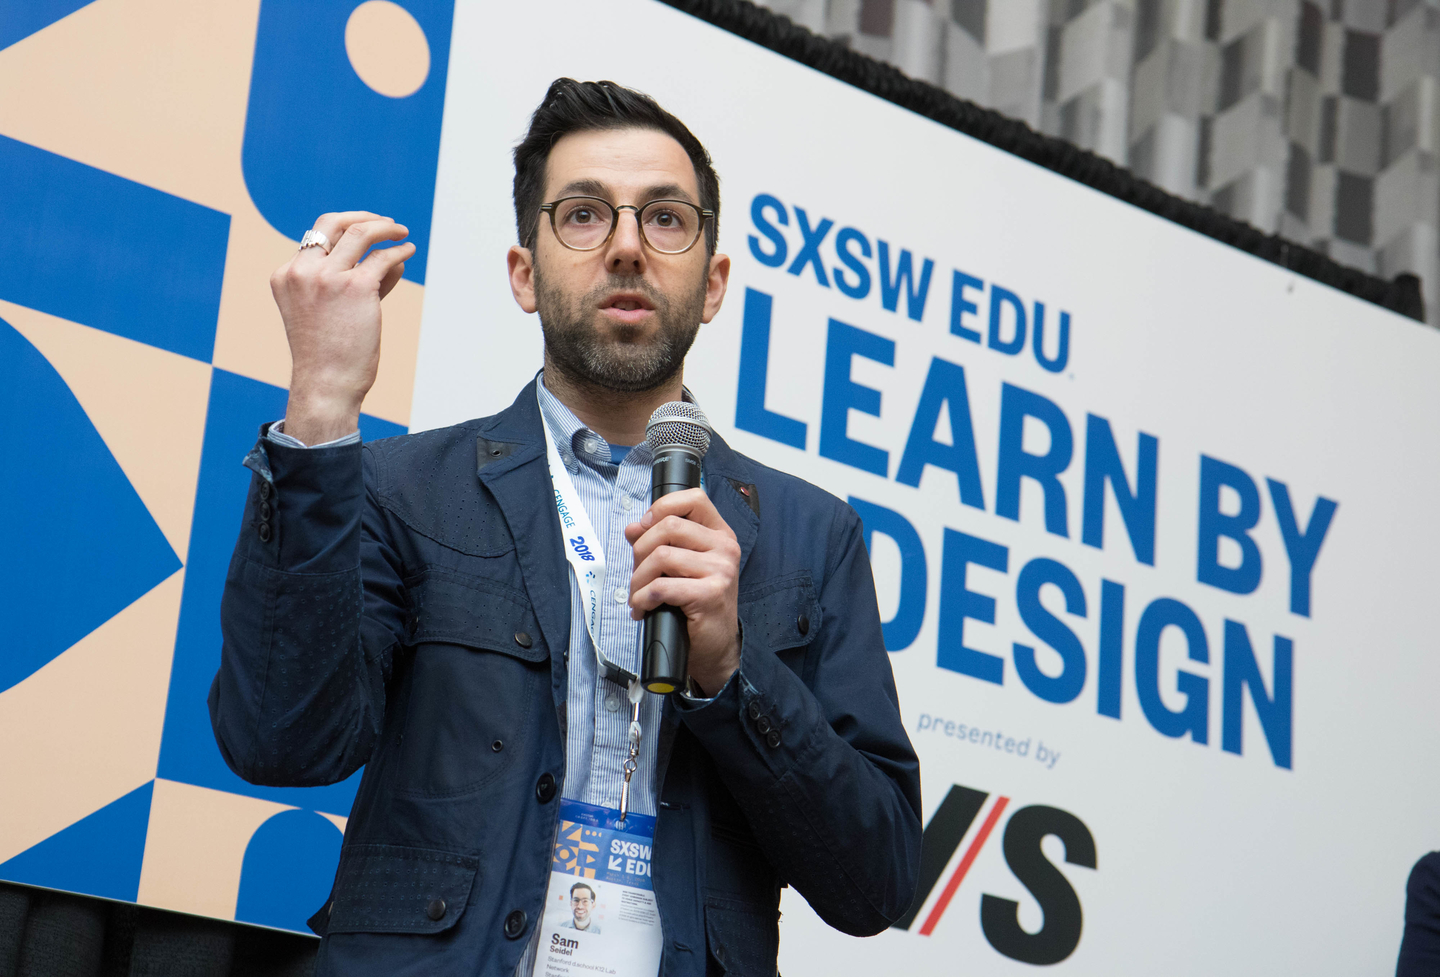 SXSW EDU 2018 Learn by Design happy hour and winner announcement. Photo by Steven Snow